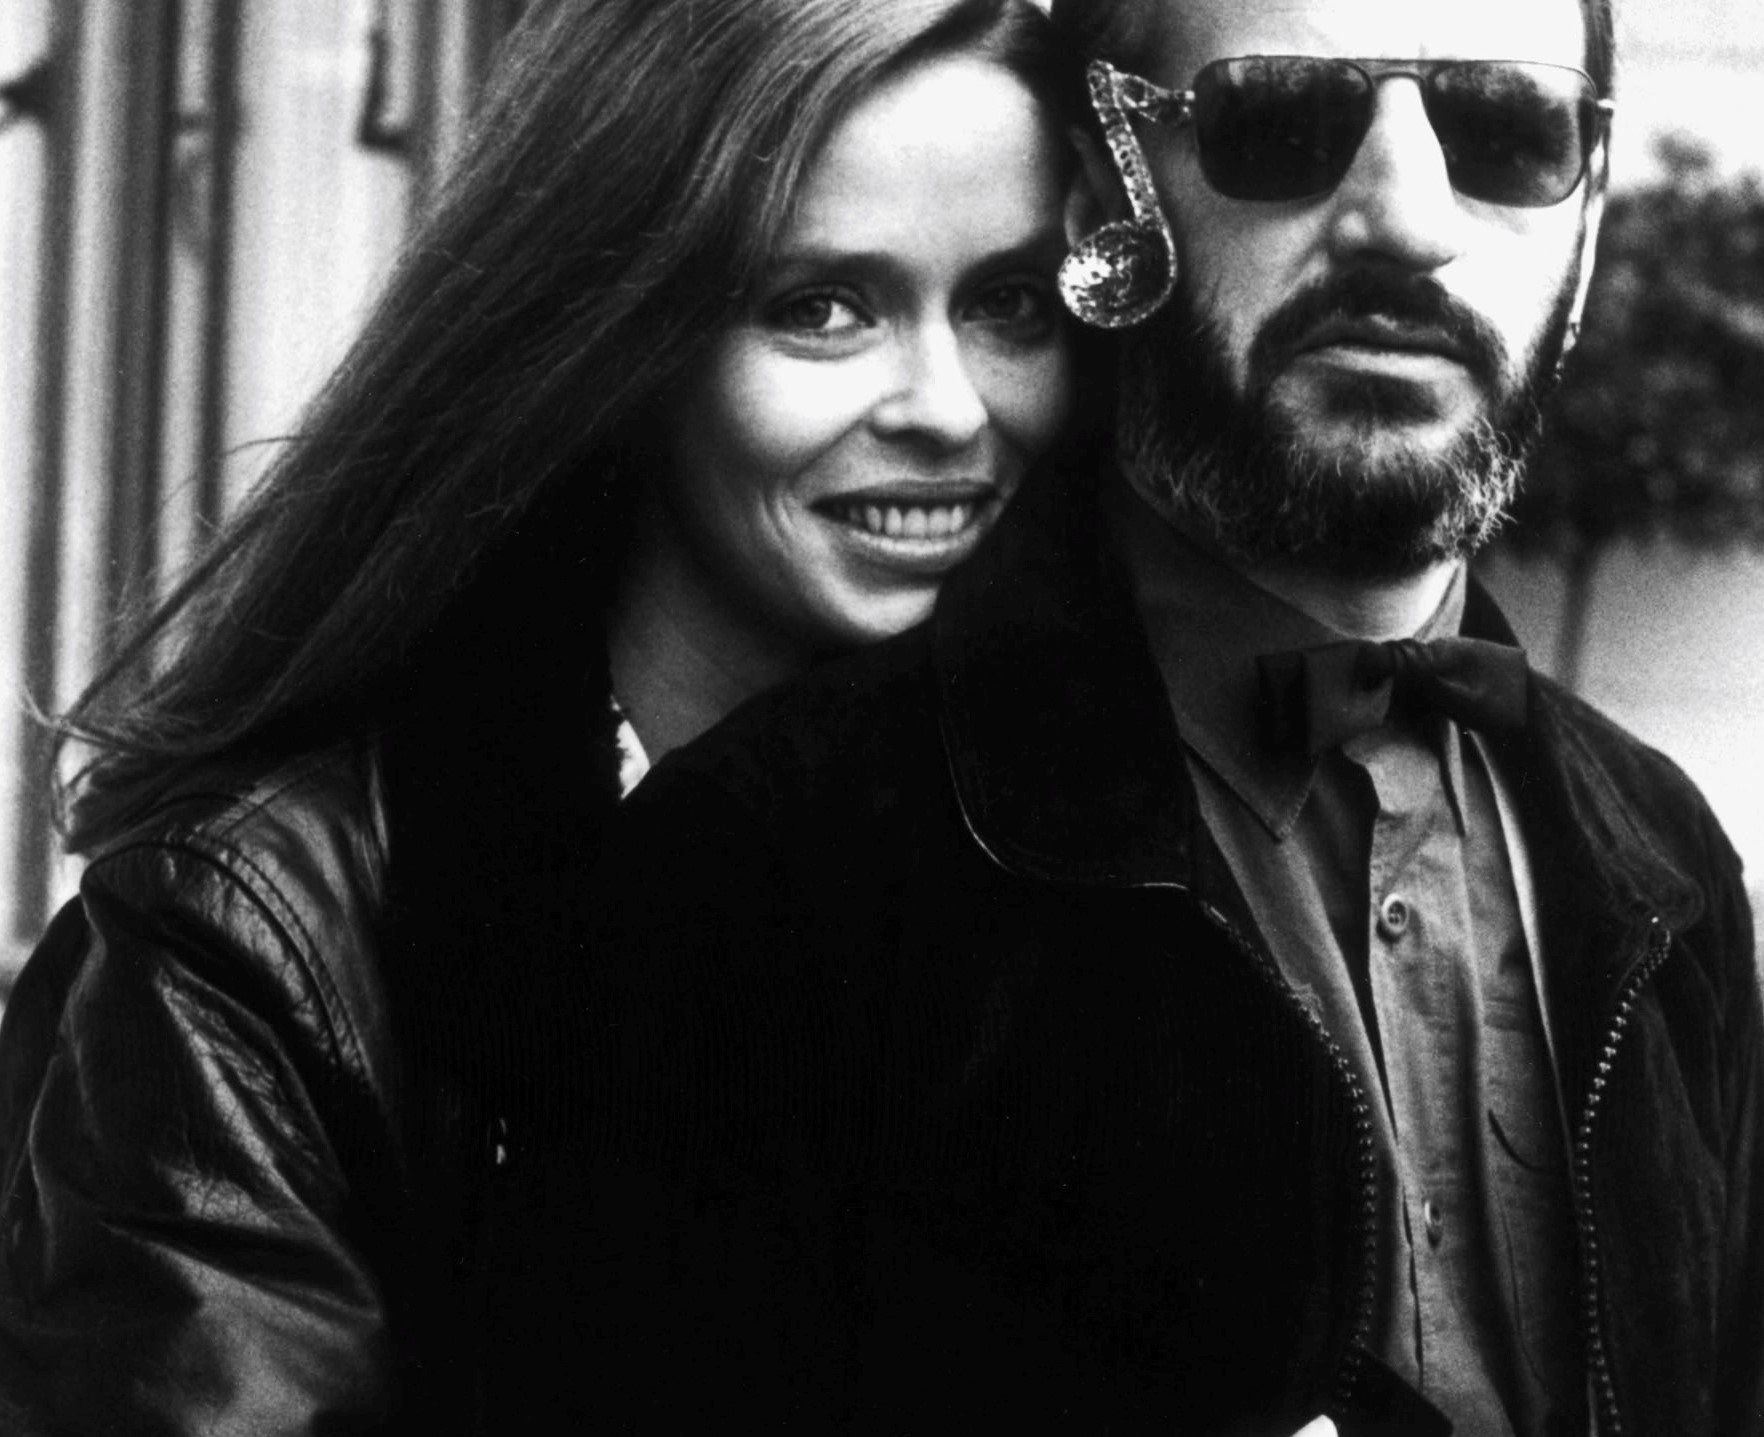 Ringo Starr and his wife, Barbara Bach, in black-and-white